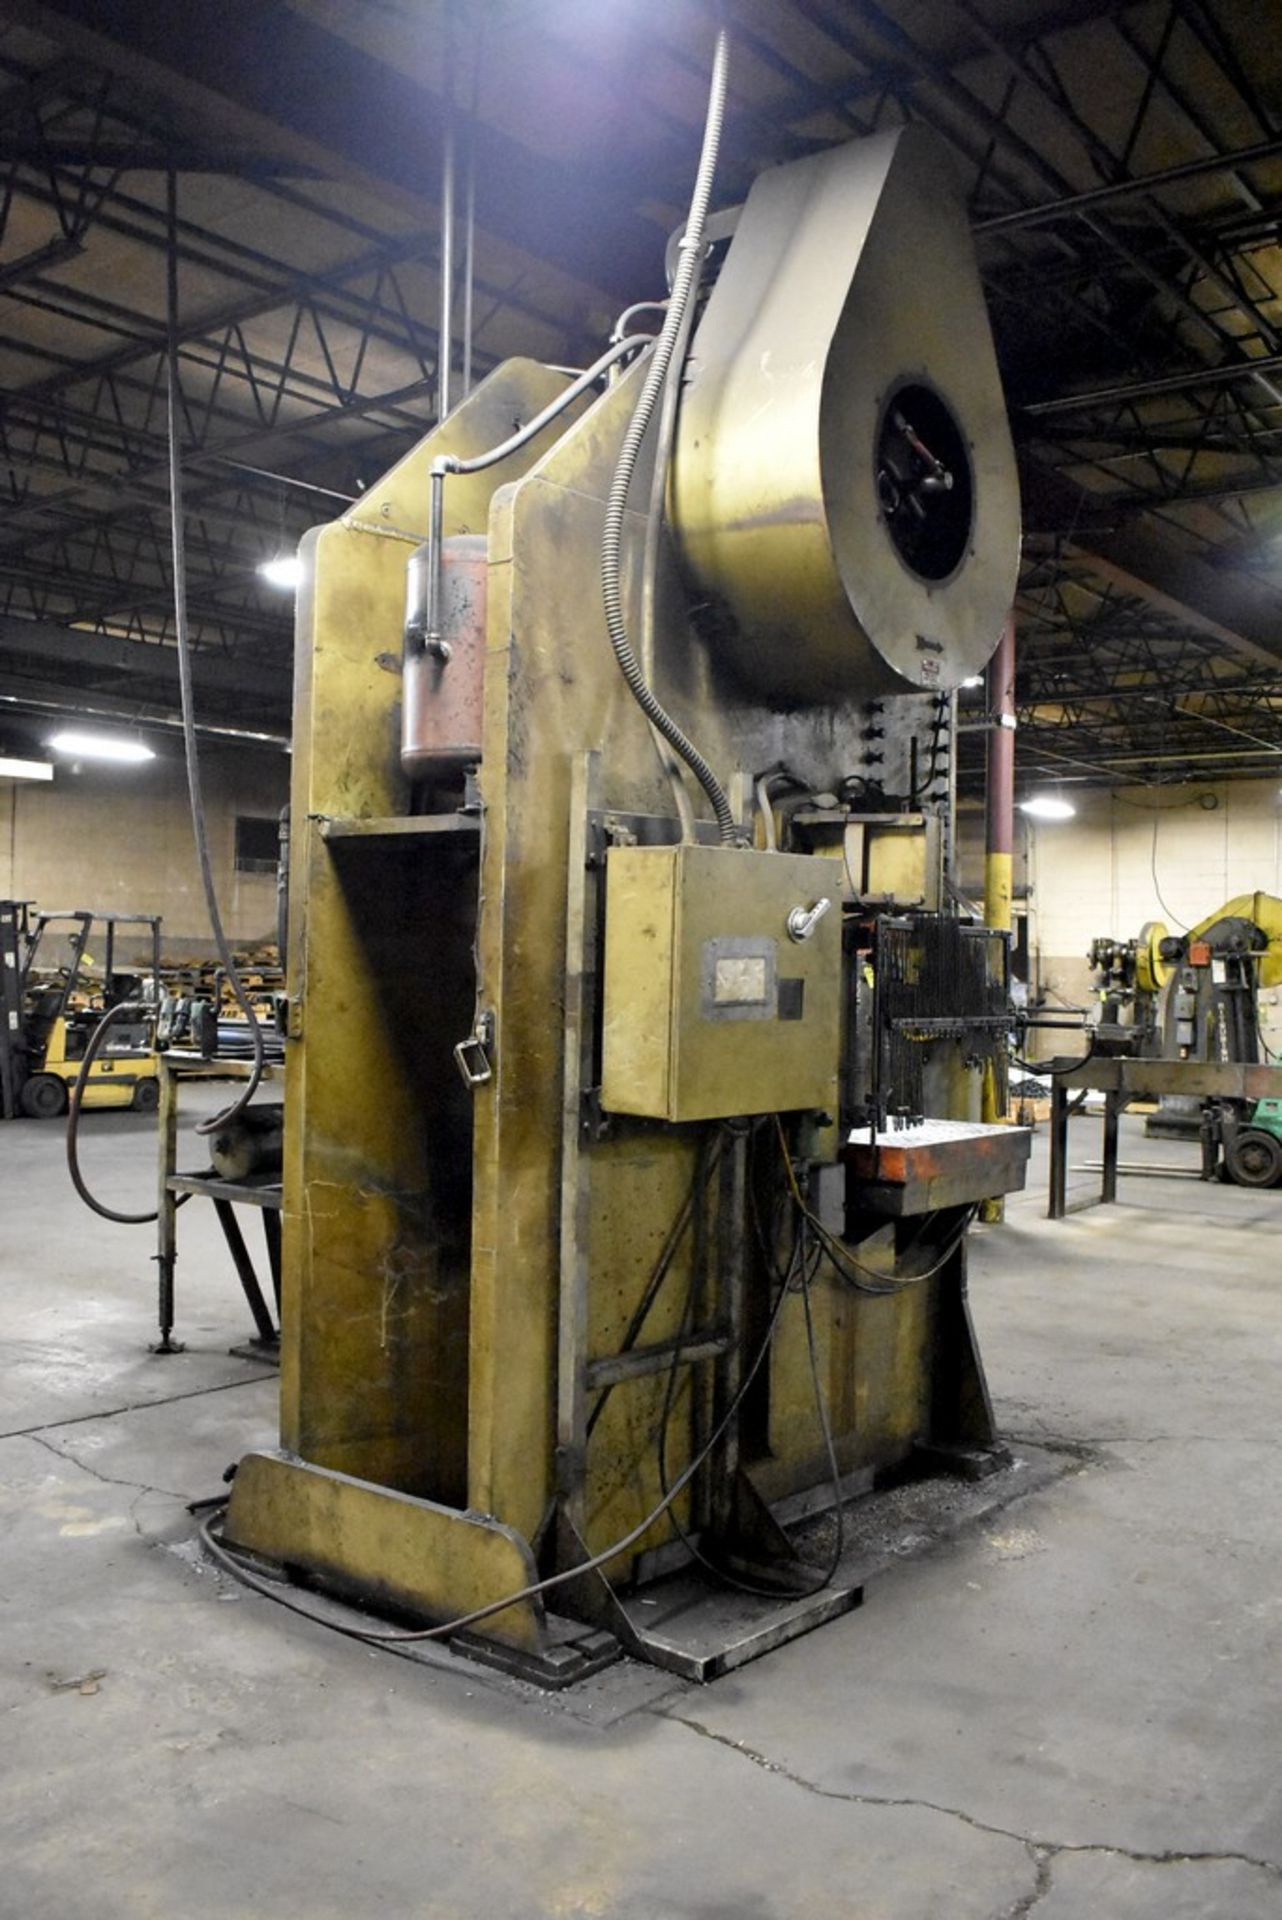 Rousselle Model G1-200 Back Geared Gap Frame Punch Press, 200 Ton - 8" Stroke - 32" x 50" Bed Area - - Image 9 of 11